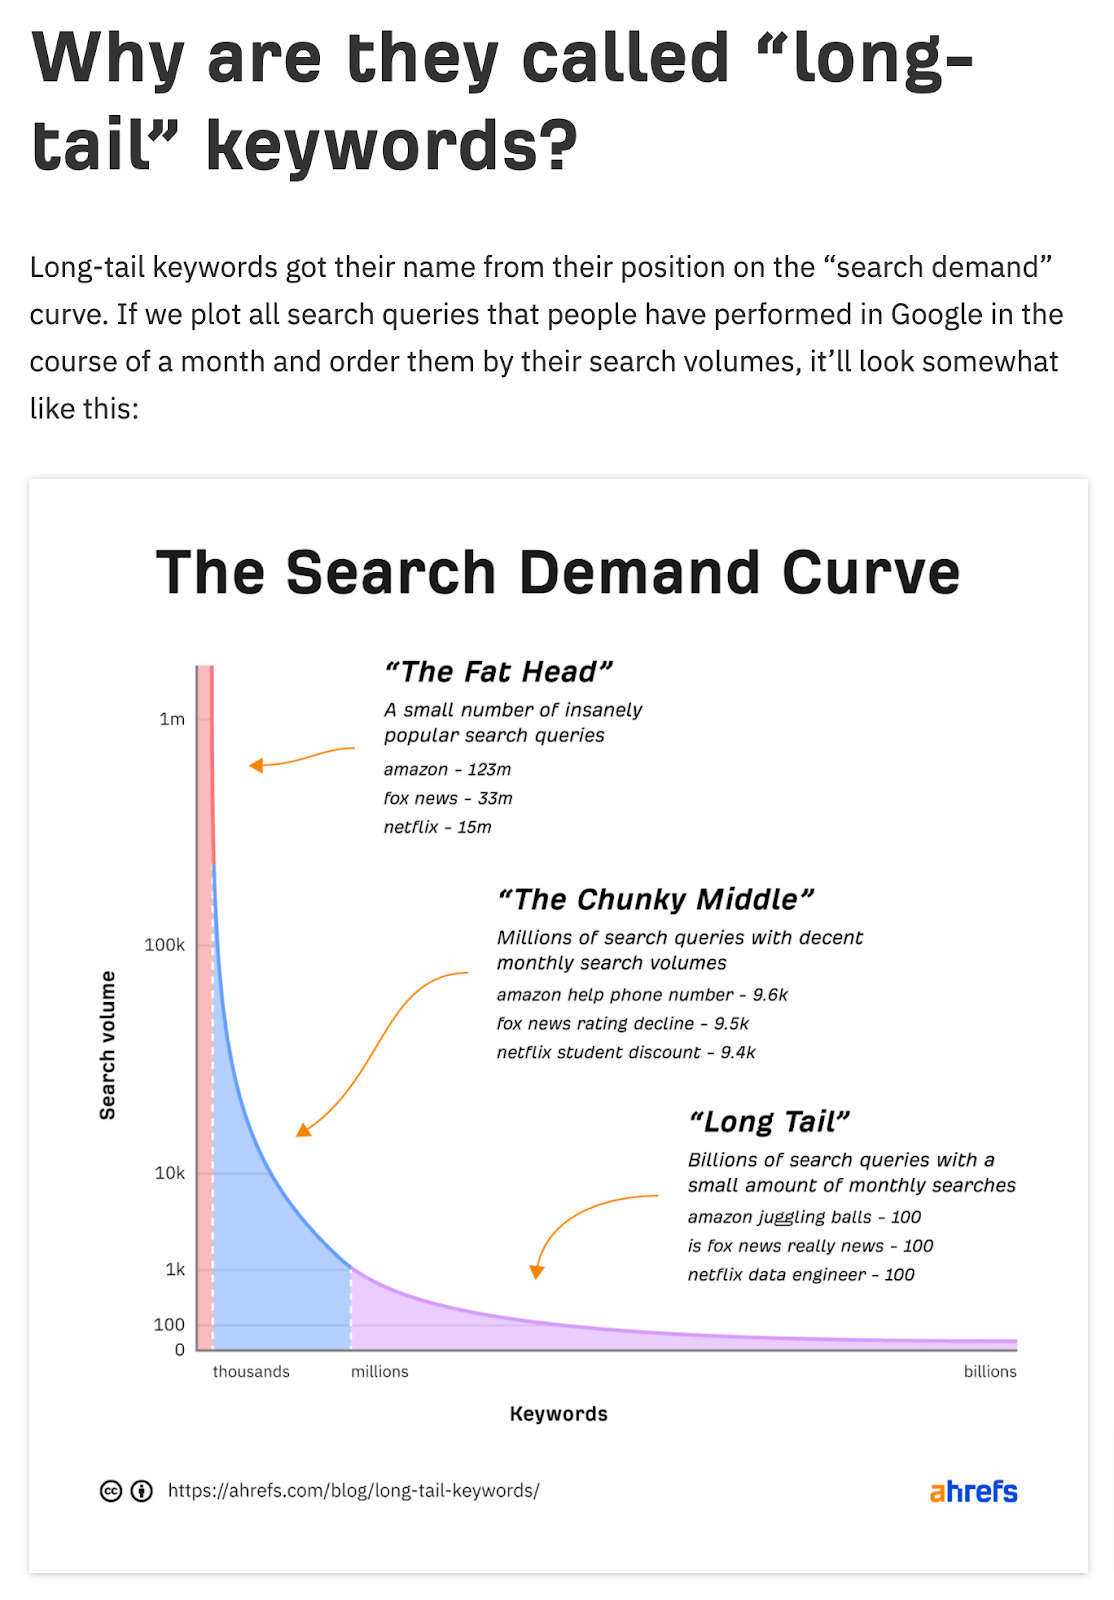 Except of Ahrefs' blog article showing a graphic about long-tail keywords